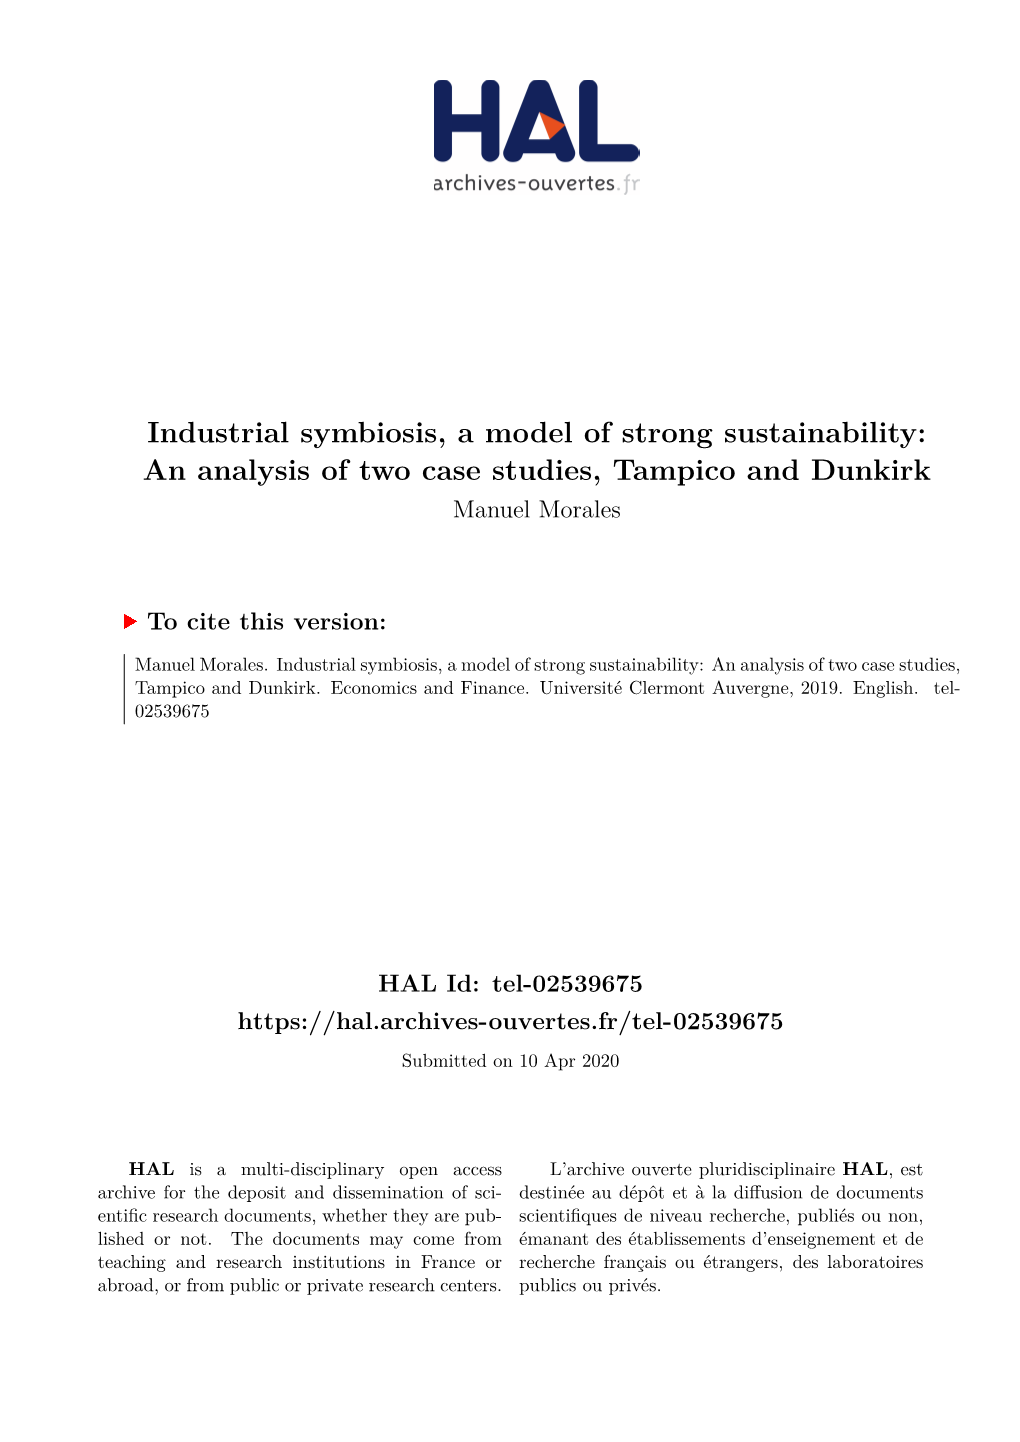 Industrial Symbiosis, a Model of Strong Sustainability: an Analysis of Two Case Studies, Tampico and Dunkirk Manuel Morales